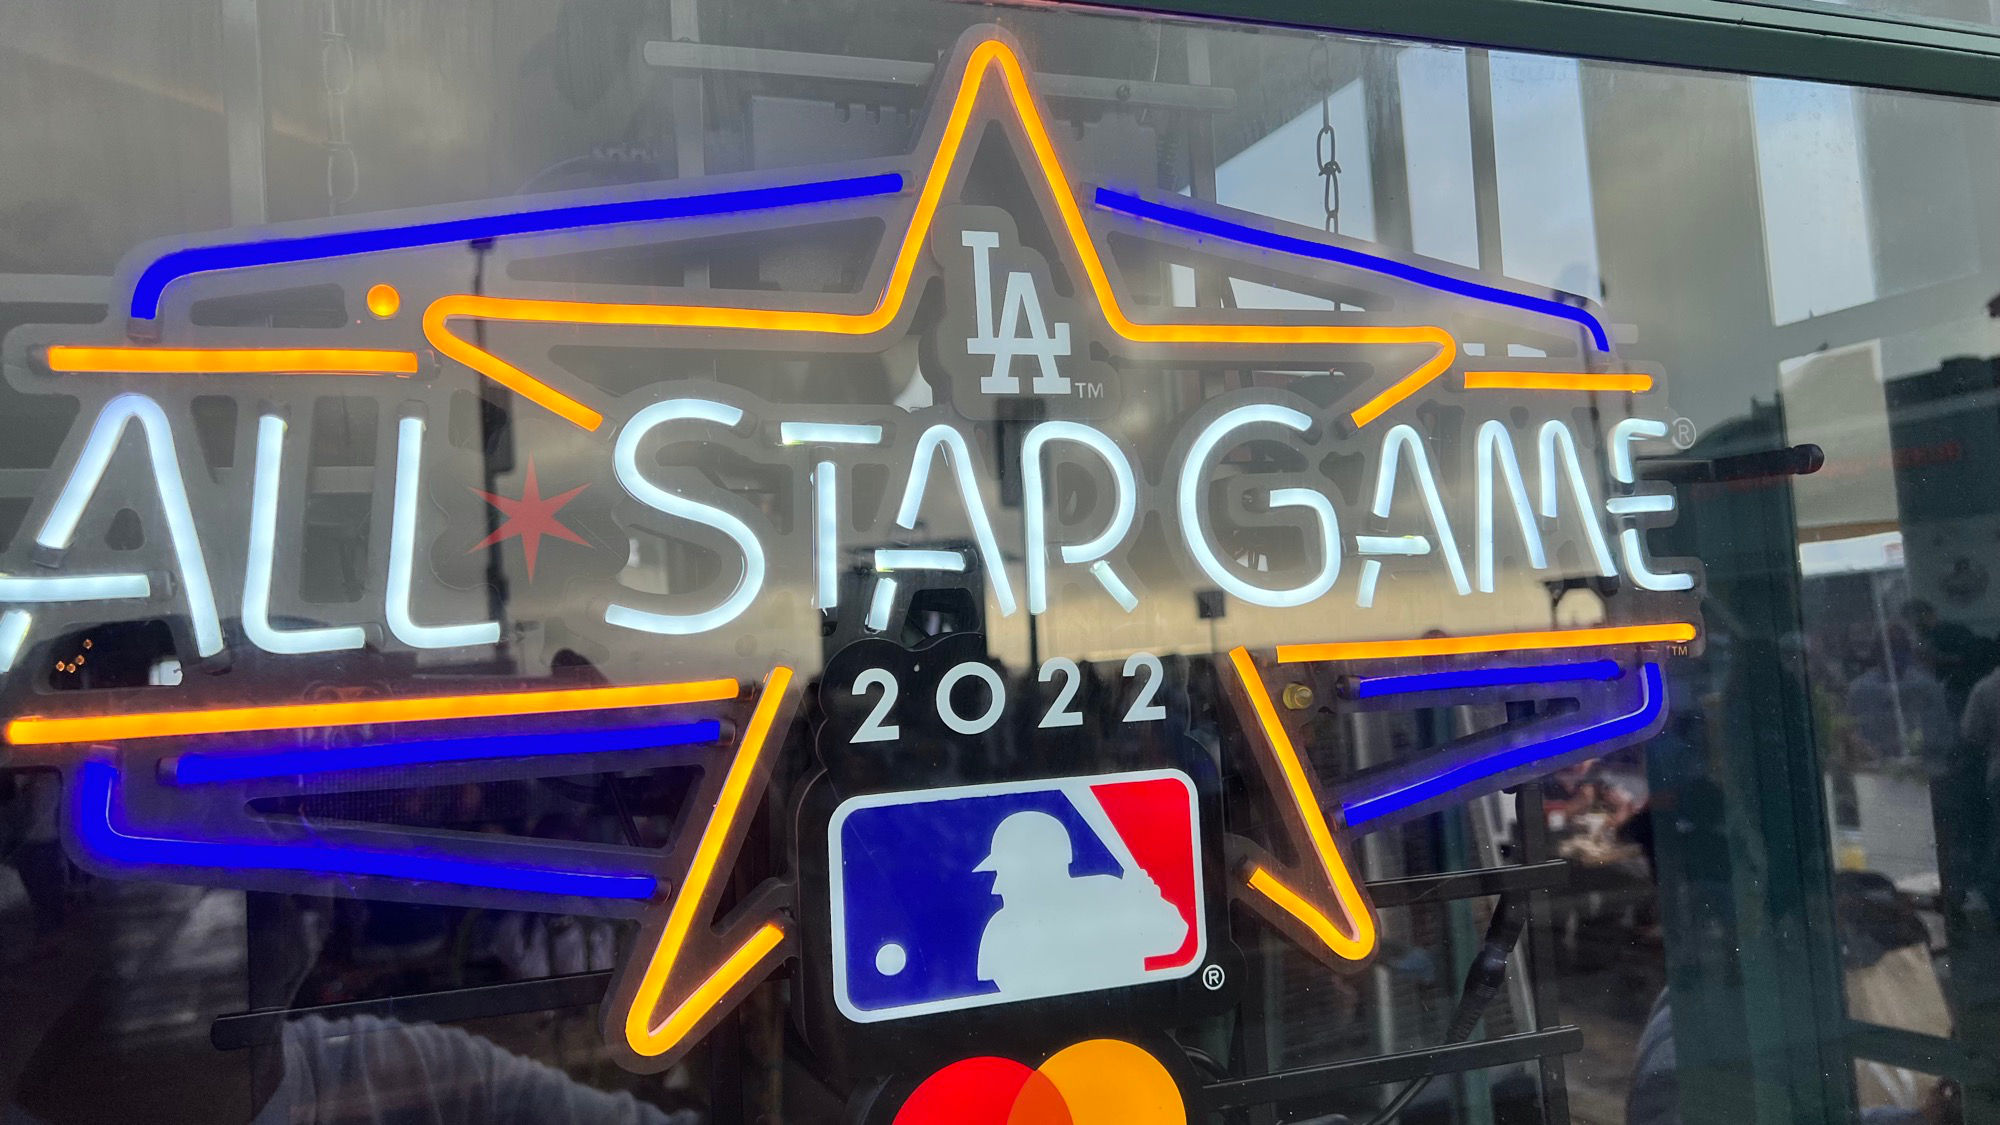 All Star Game Neon Sign